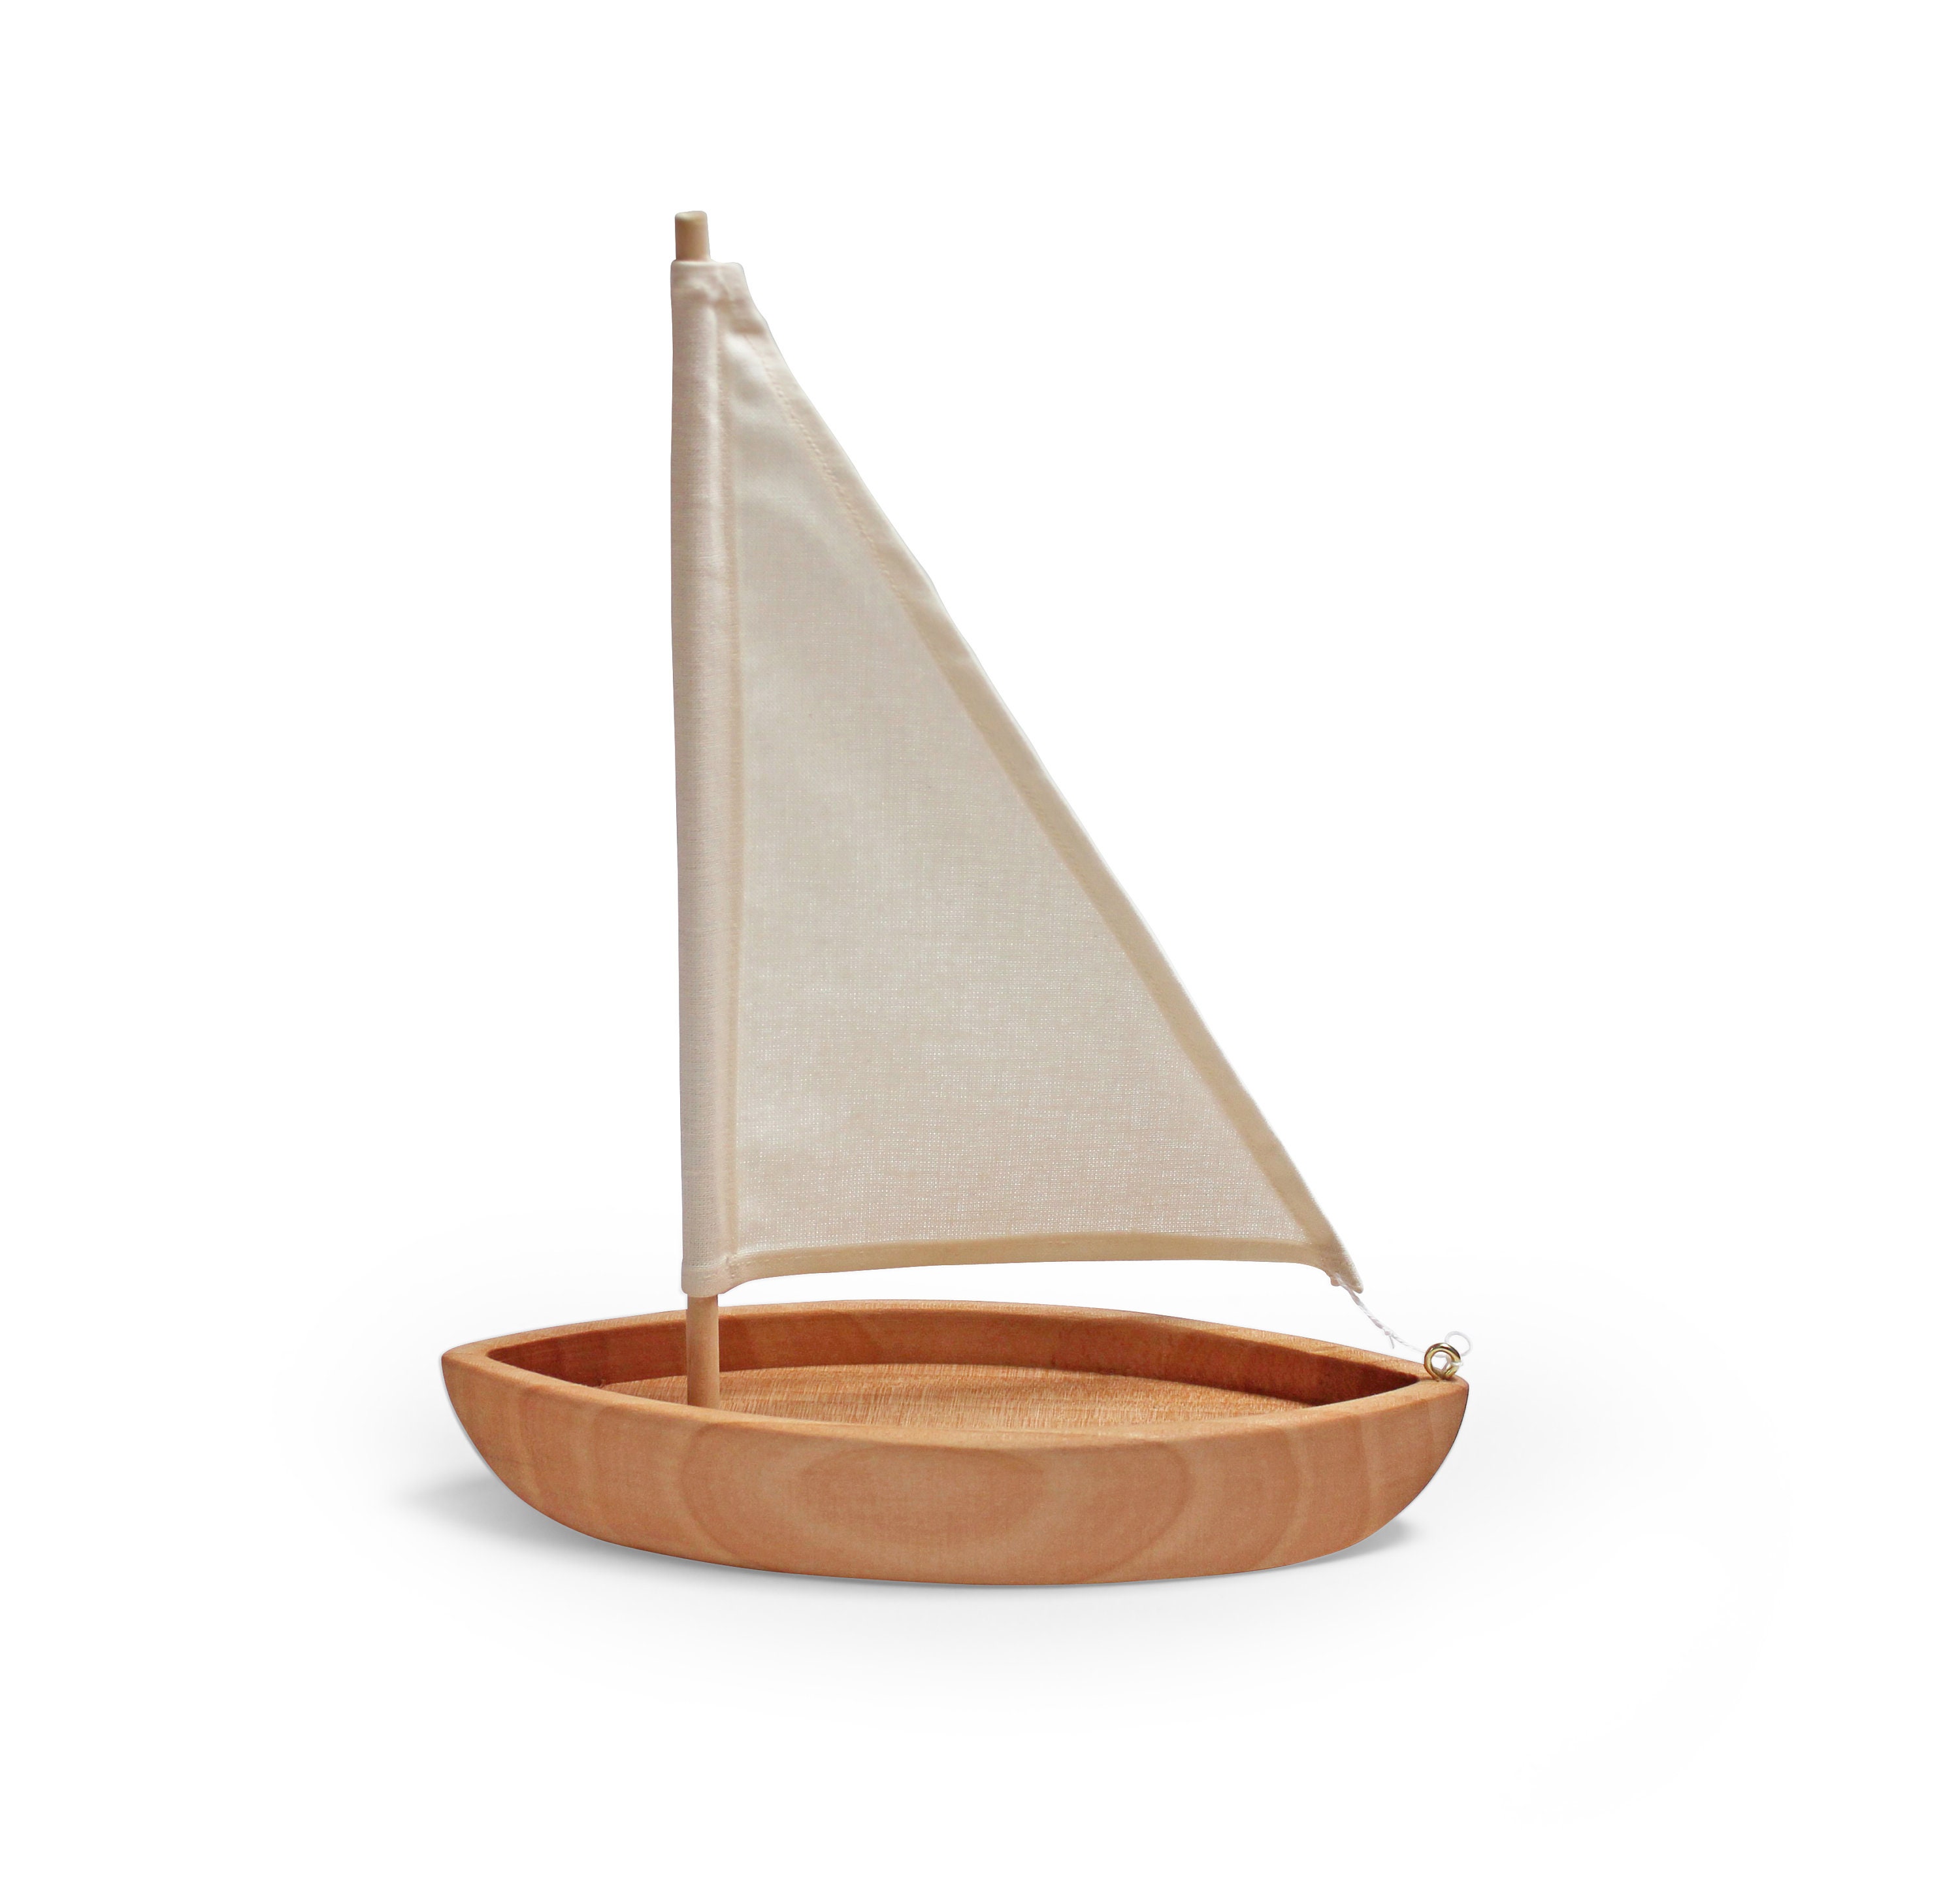 Wooden Toy Boat Sailboat Boat Toy Natural